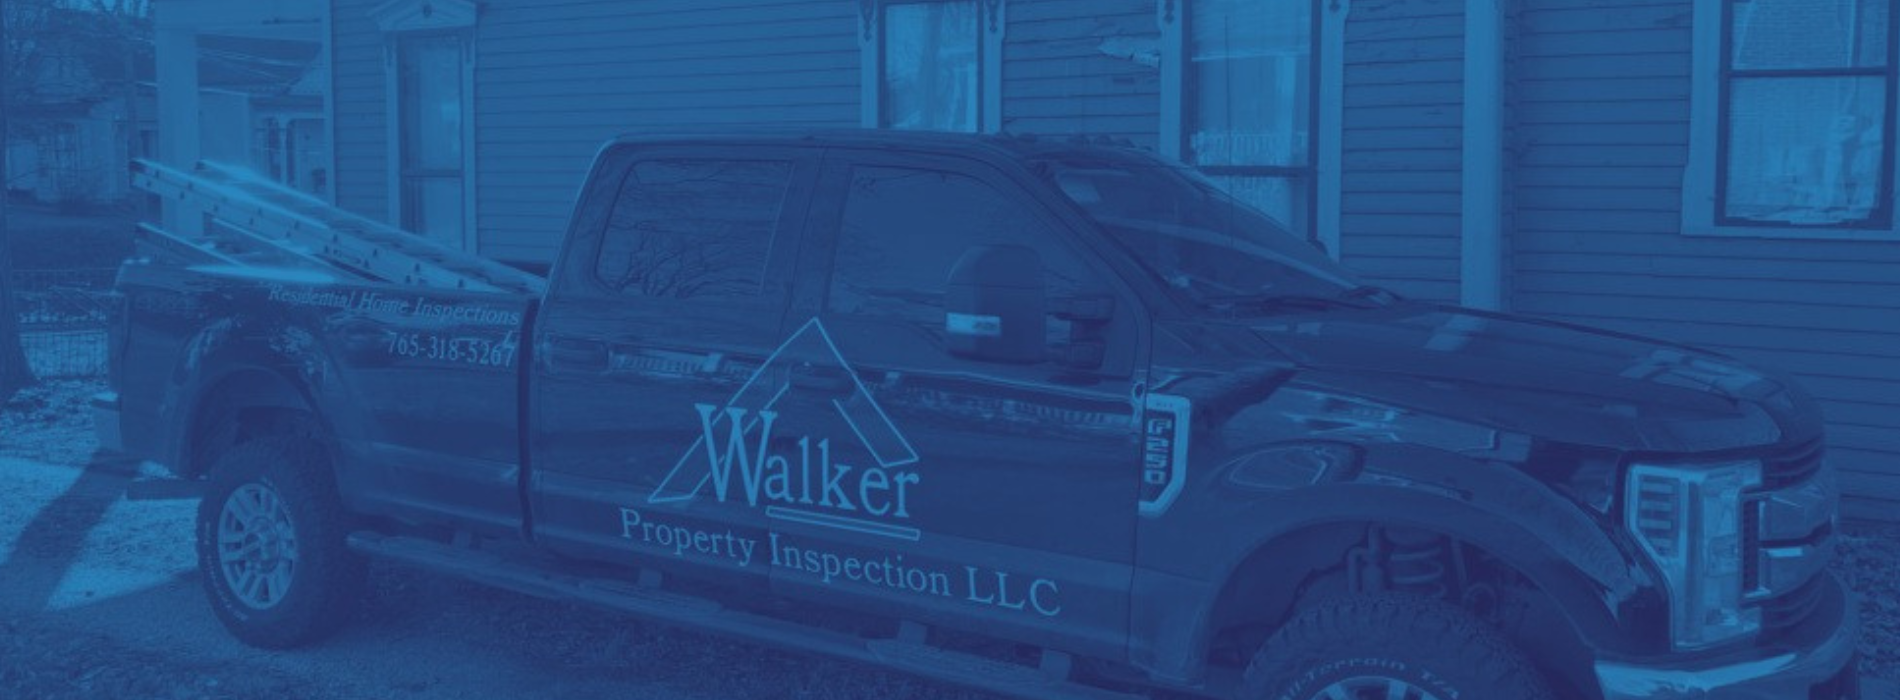 We treat every home inspection as if our own family were about to move in.